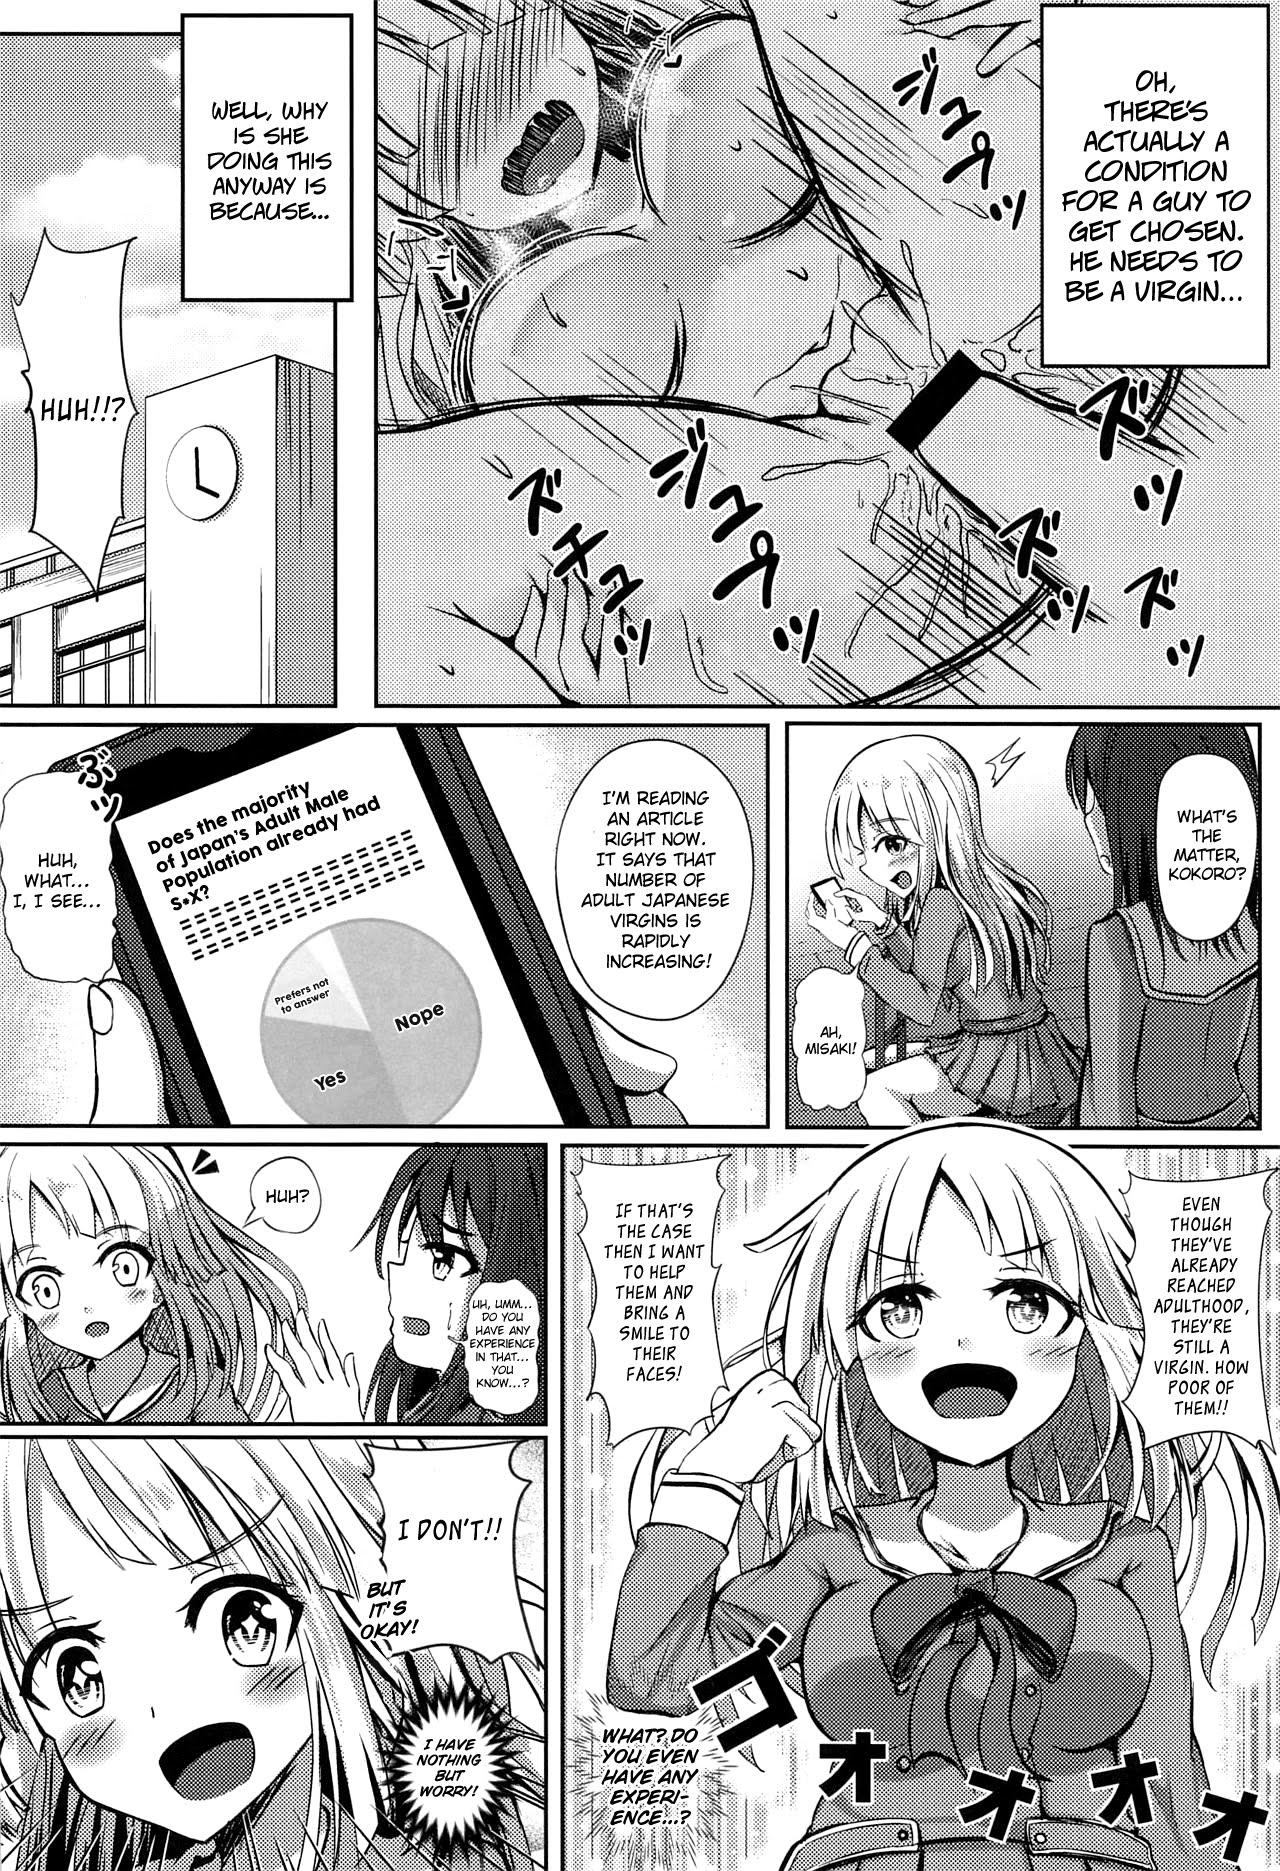 Free Amateur Porn HALLO HAPPY DELIVERY - Bang dream T Girl - Page 3